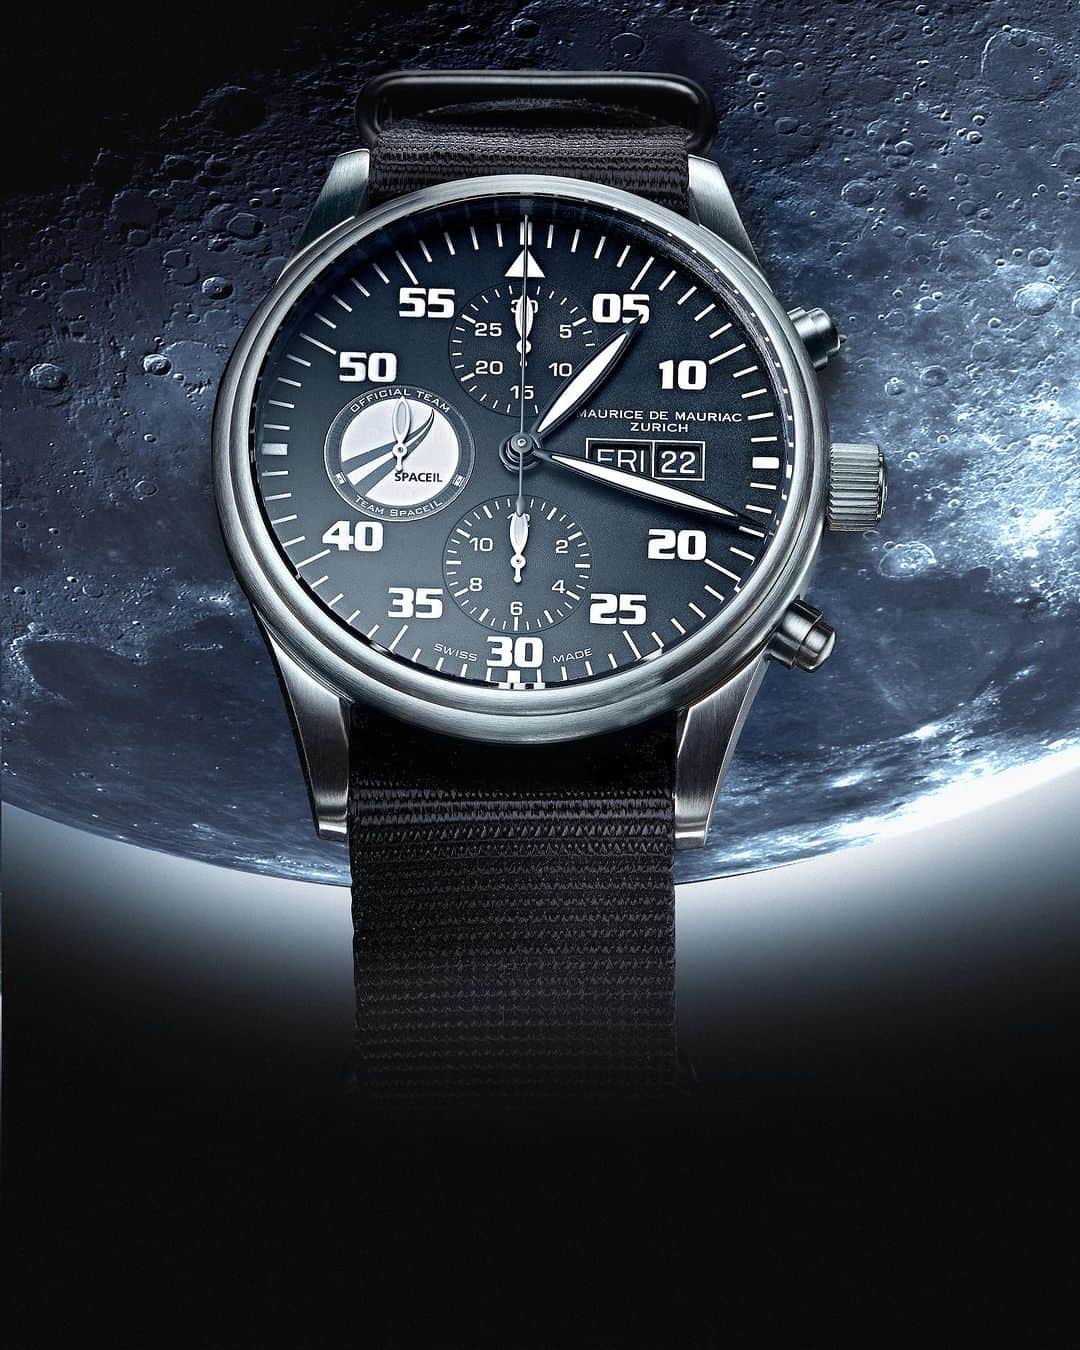 Maurice De Mauriac Zurichのインスタグラム：「The world watches what is happening in Israel and the time stands still. But one is for sure: #lovealwayswins and not war!  It wasn't so long ago that our watches were part of the Israeli moon landing operation as part of the Google Lunar X Prize. Together with #spaceIL, we launched our Moonwatch back then. We are still proud to have been part of this incredible story, such a little country with such a big impact in the world...it still is.  Many of the people who were involved are friends with us today. We want to shout out to all these people & to our friends & family in Israel that we are shaken and we care. 🤍💙🇮🇱#ourloveisstrongerthantheirhate   Massimo, Leonard, Masha and the whole Dreifuss family  #MauriceDeMauriac #MDM #MDMuhren #MDMwatches #israel #spaceil #space #spacex #spaceart #israel #israelpalestine #pleasepeace #peace #shabbatshalom #shabbat」